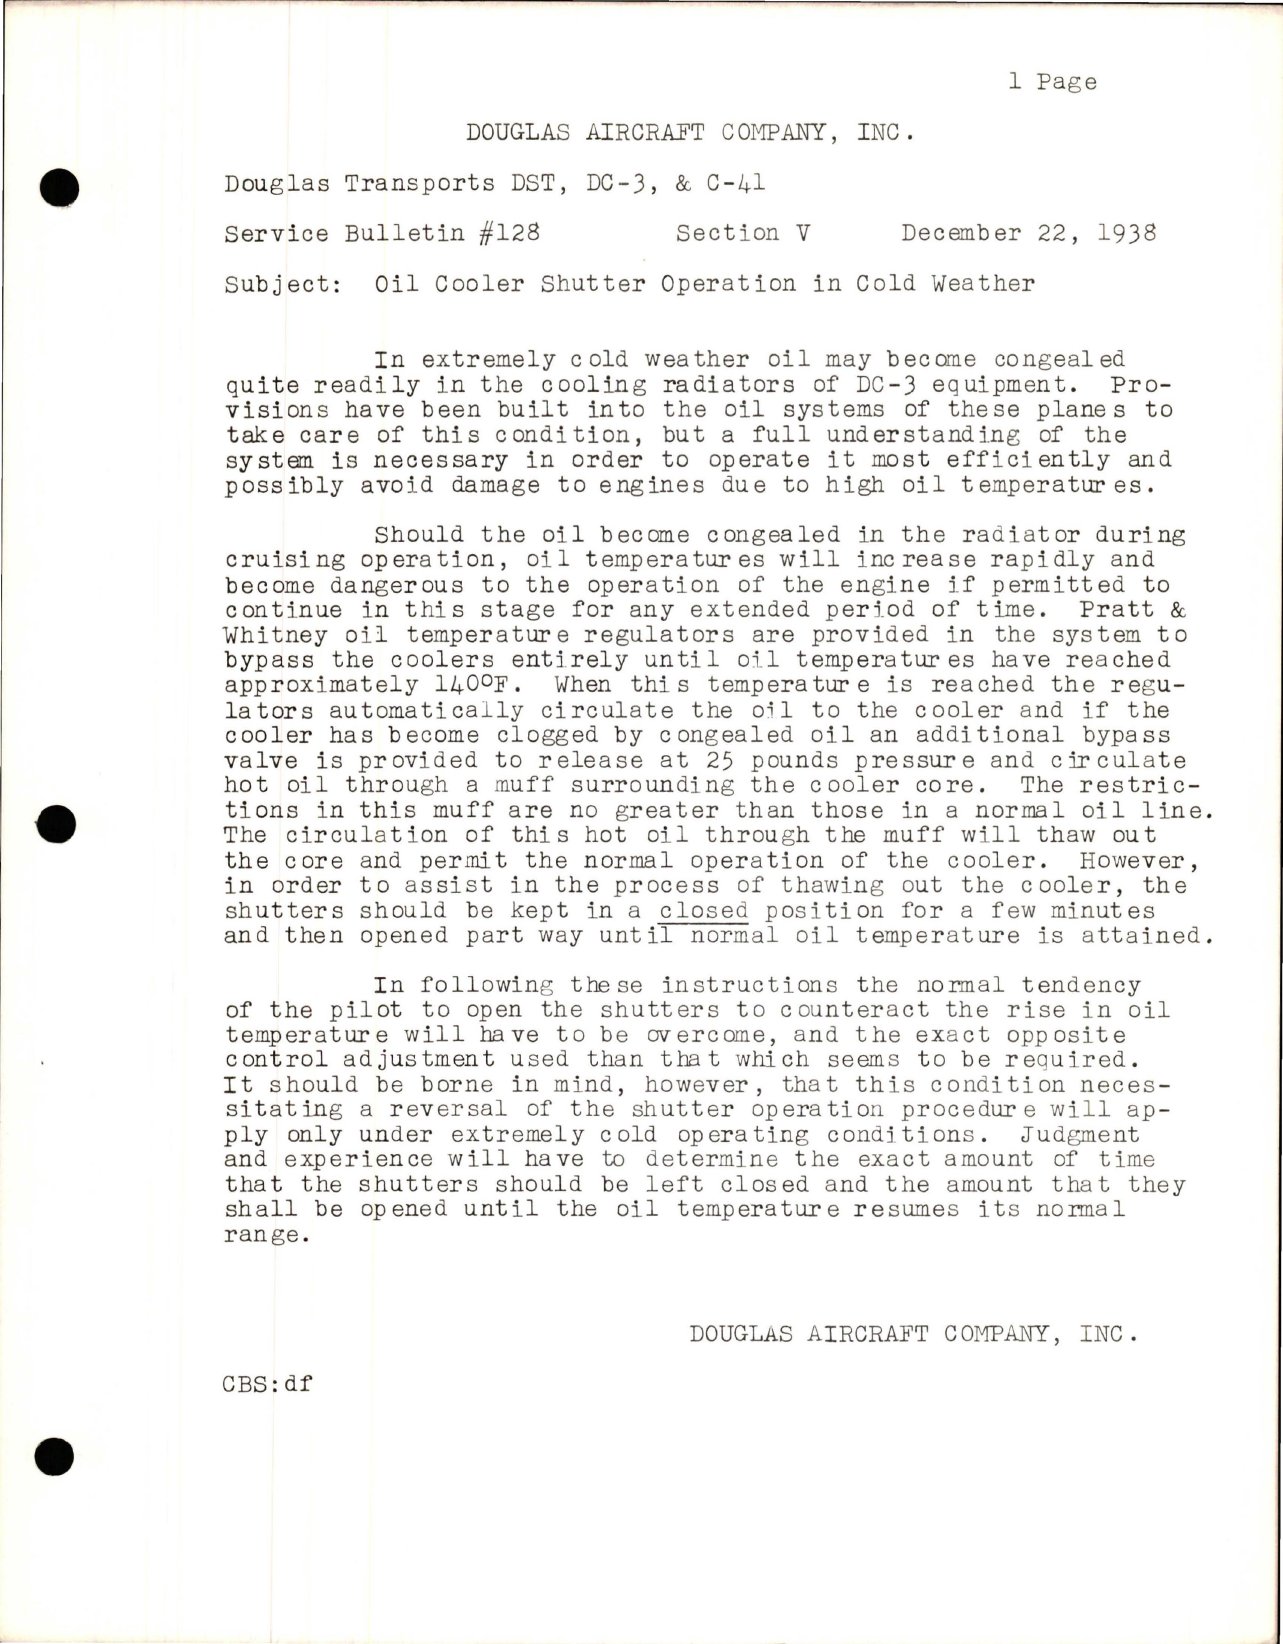 Sample page 1 from AirCorps Library document: Oil Cooler Shutter Operational in Cold Weather